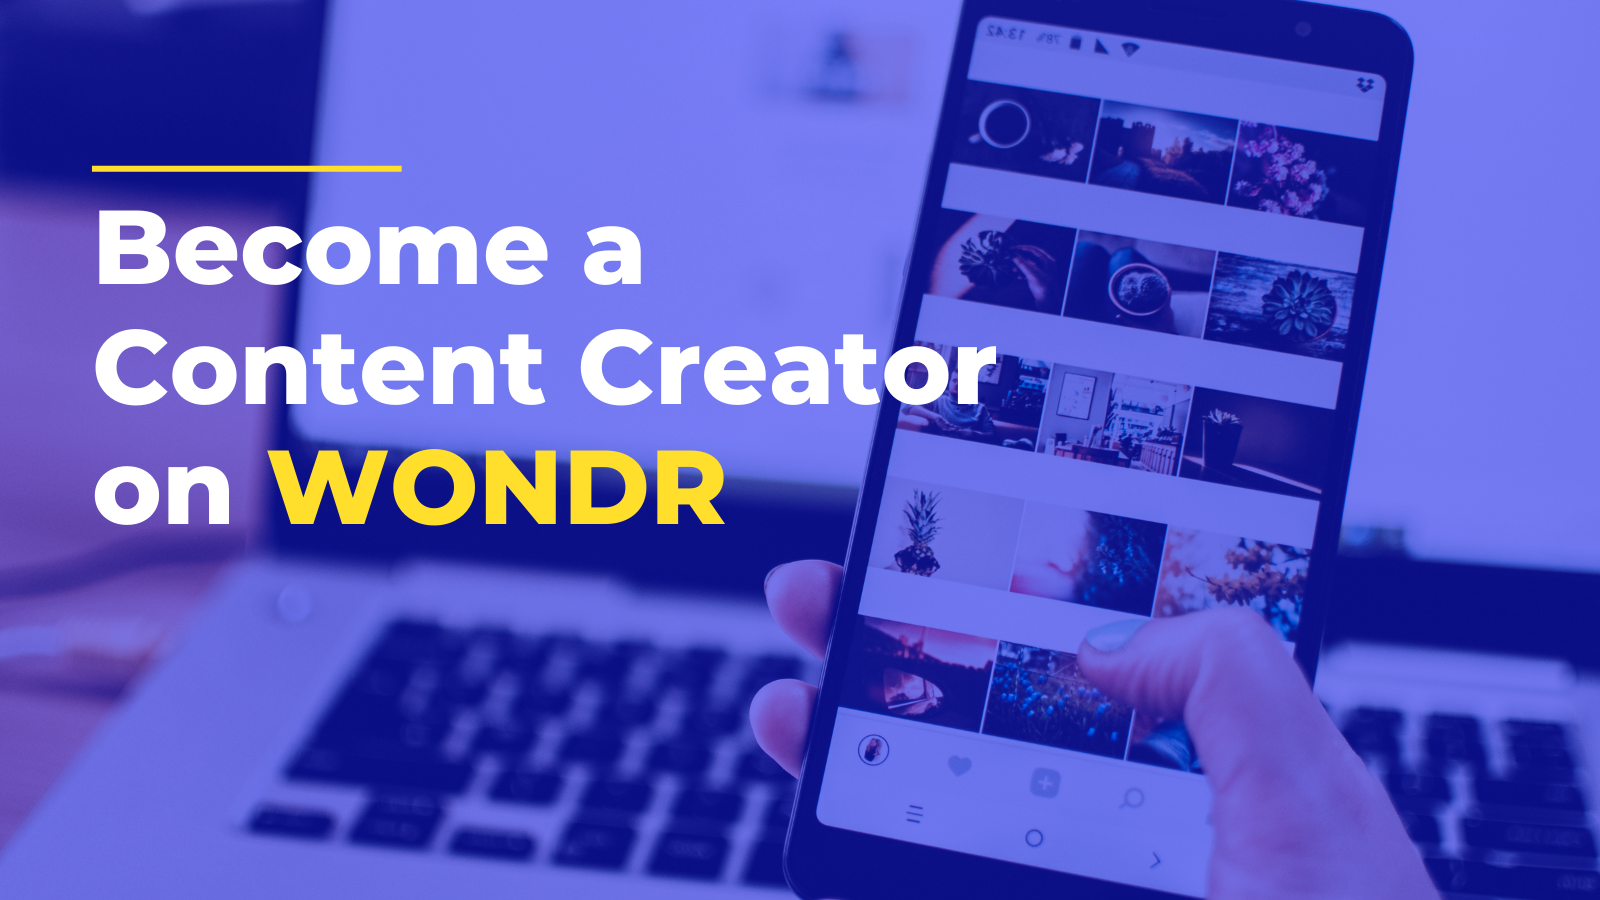 Get started as content creator on Wondr